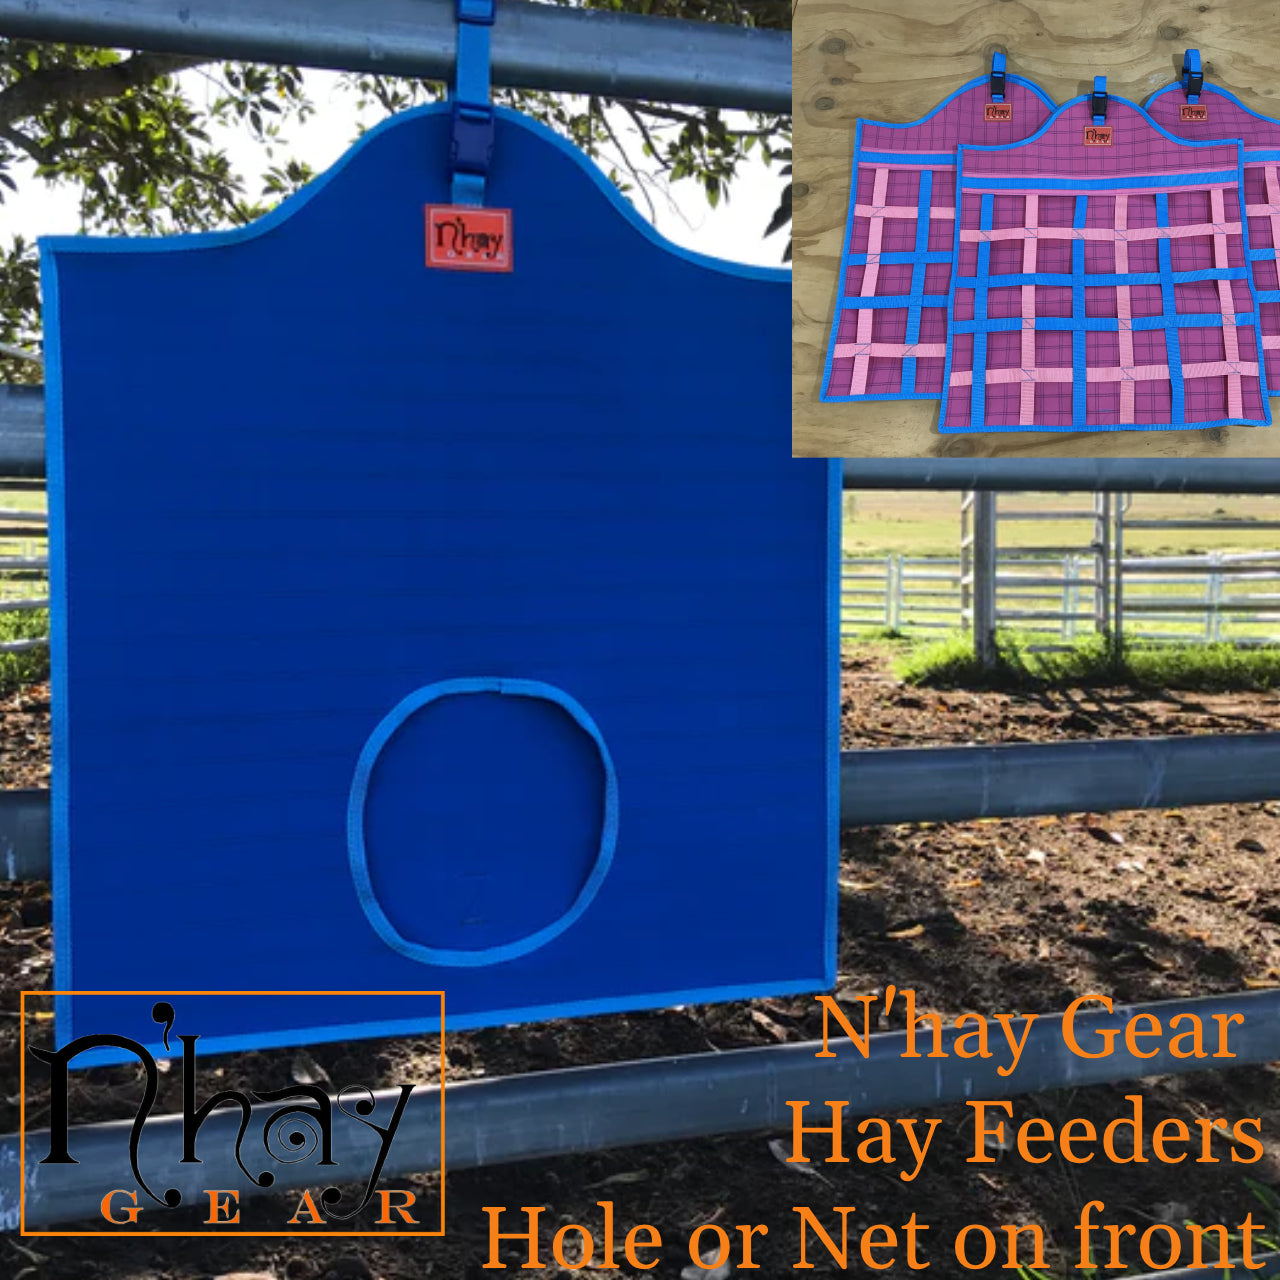 N'hay Gear Hay Feeder - Netted or Hole front